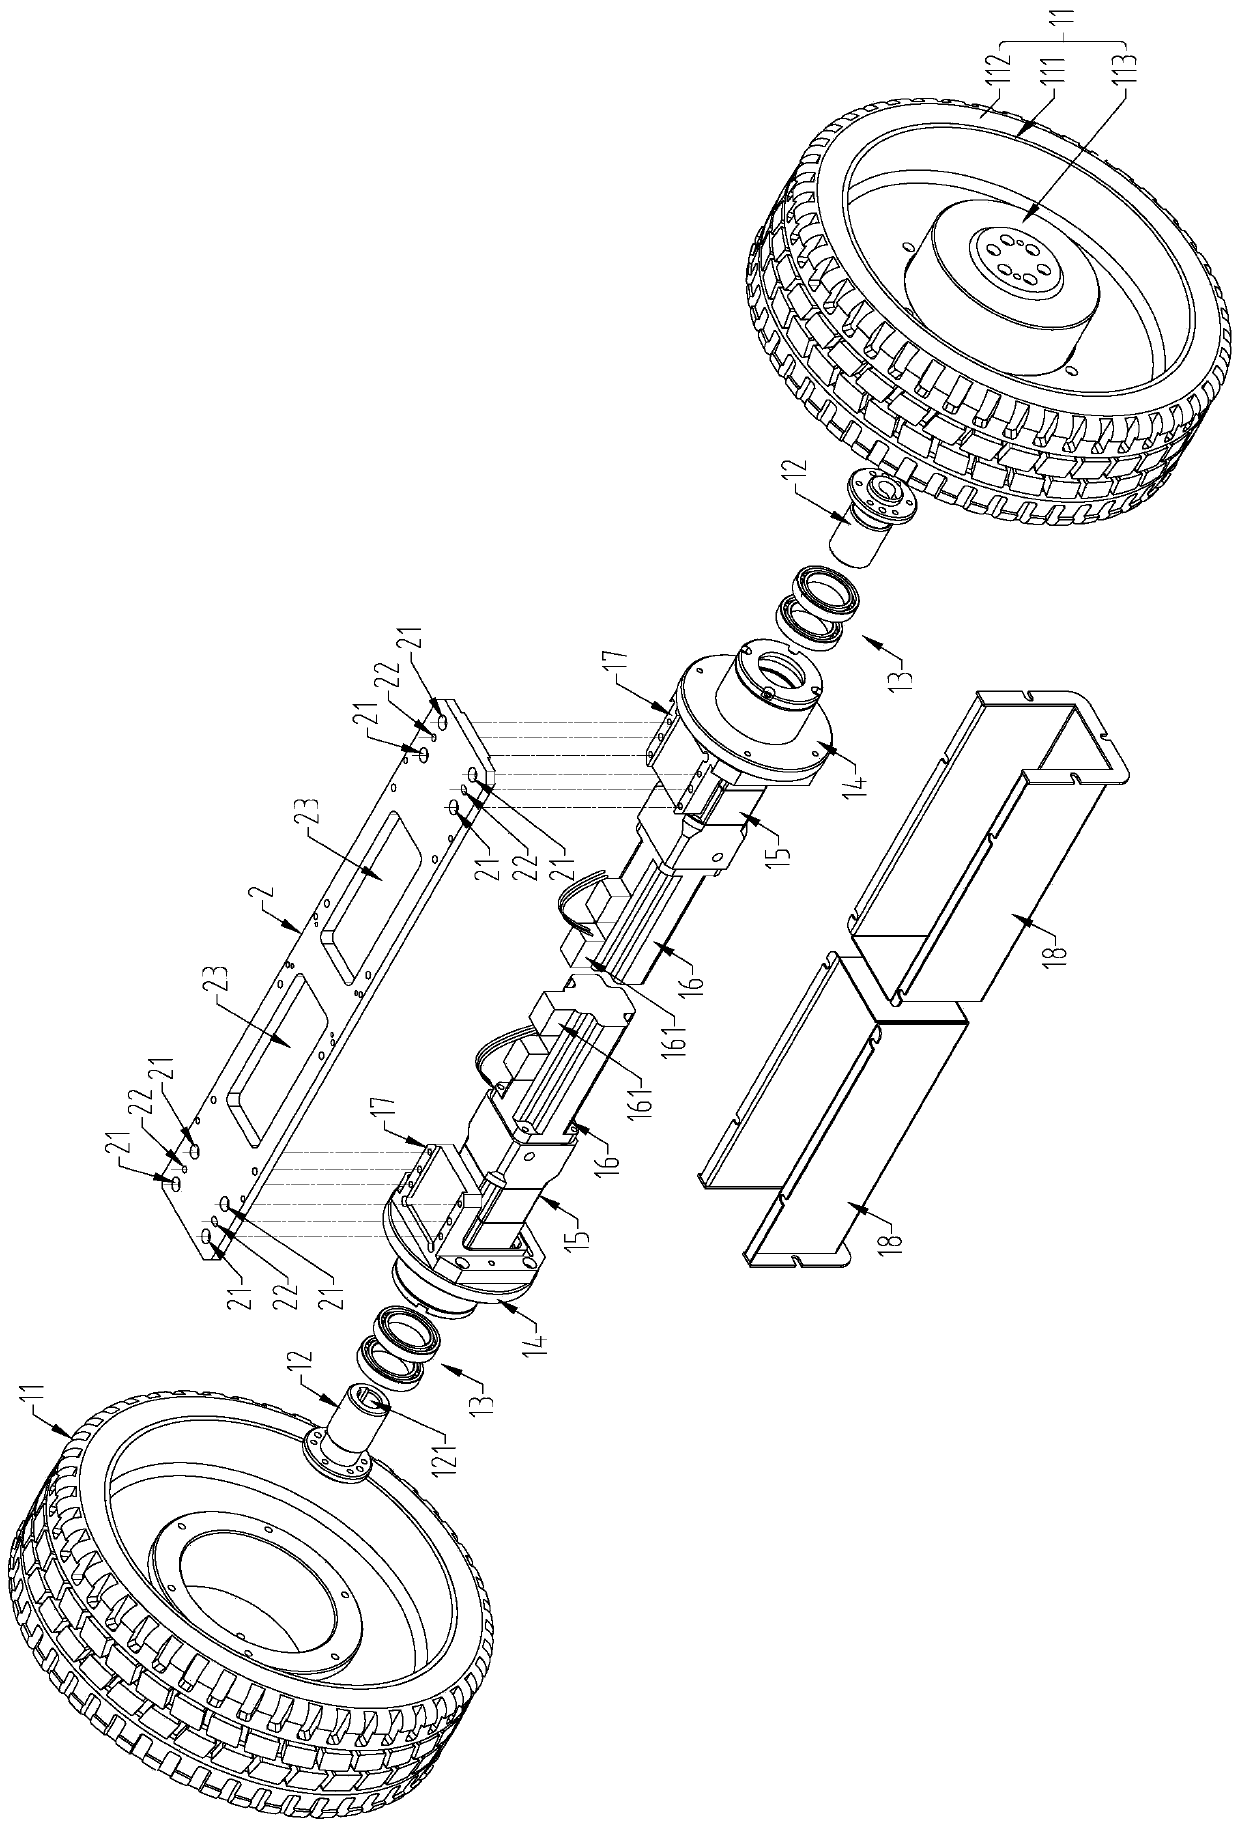 Two-wheel drive differential wheel driving unit structure